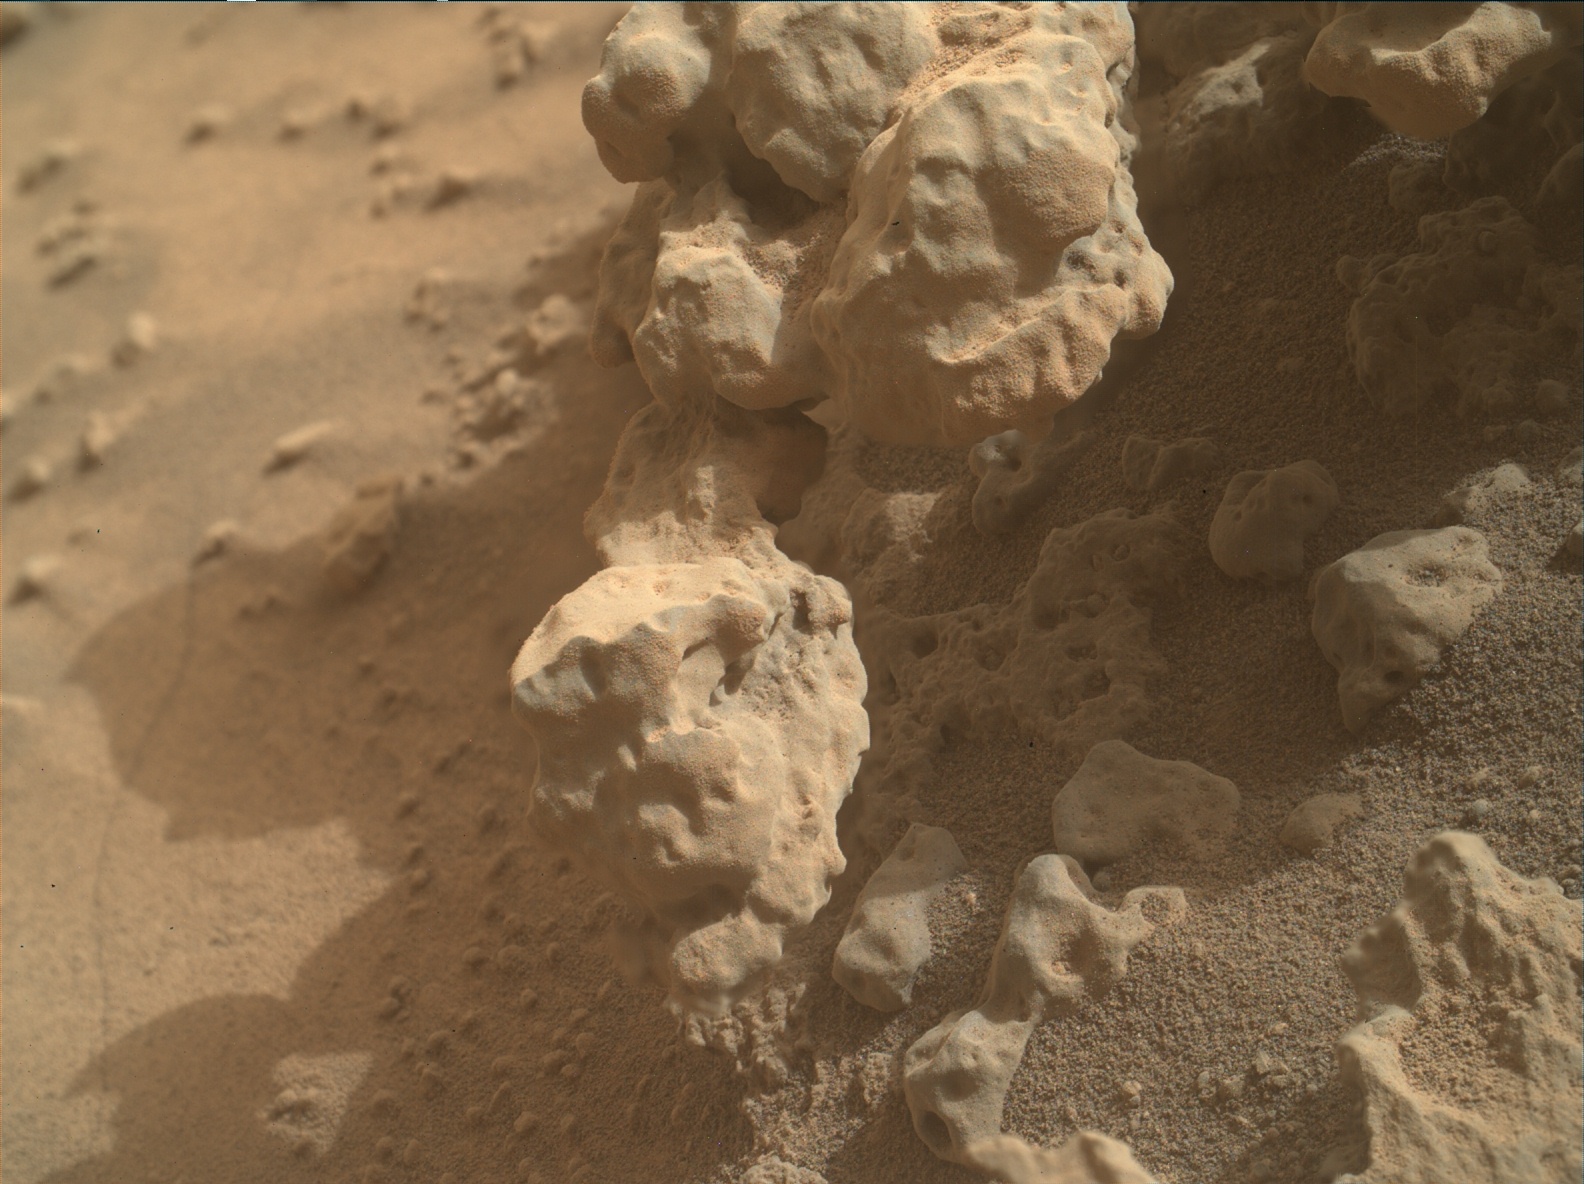 Nasa's Mars rover Curiosity acquired this image using its Mars Hand Lens Imager (MAHLI) on Sol 3724